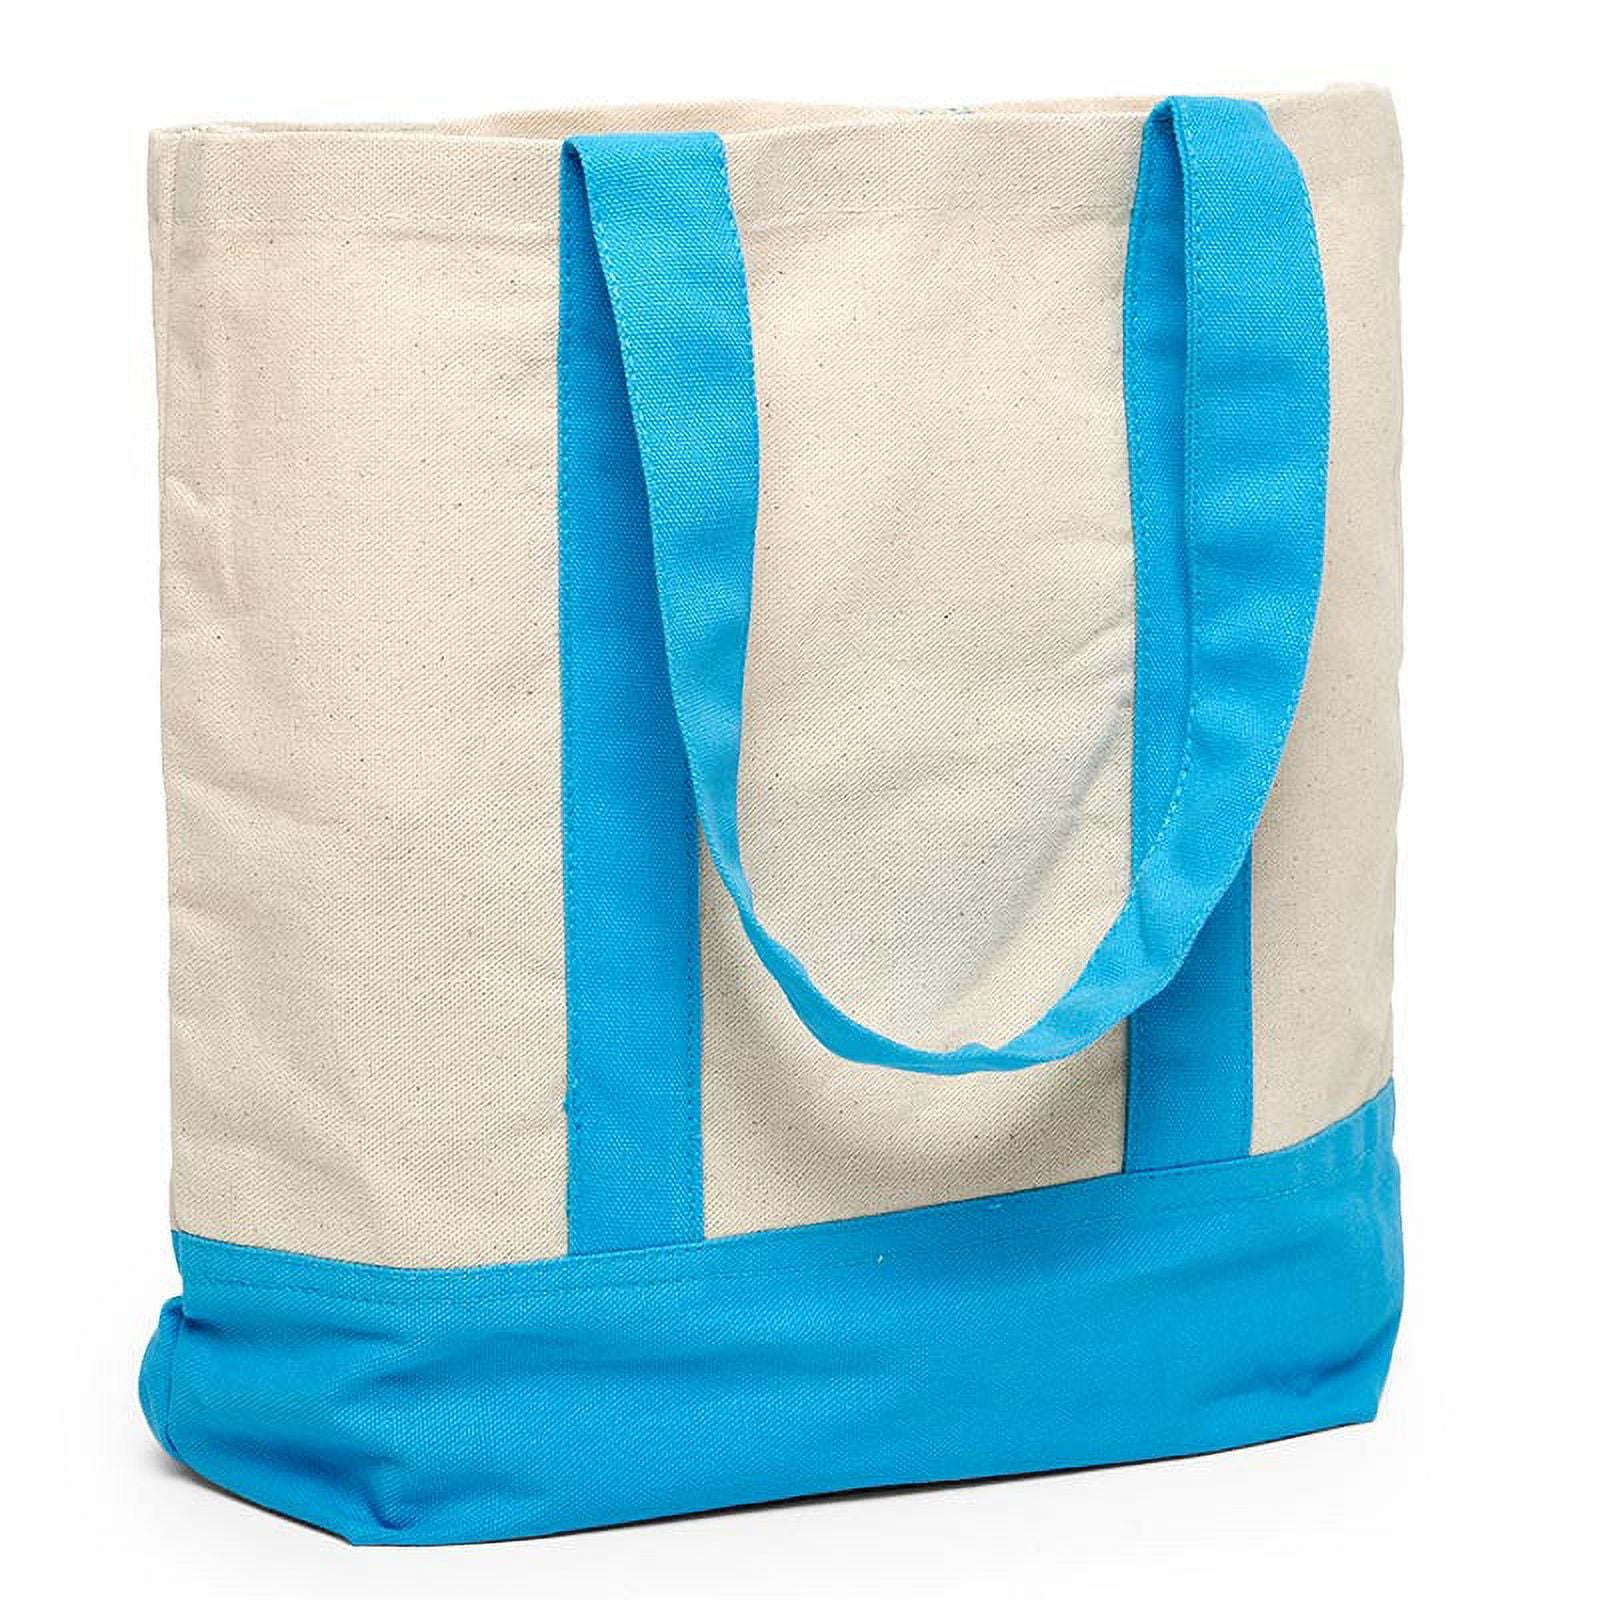 Blank Tote Bags Crafts